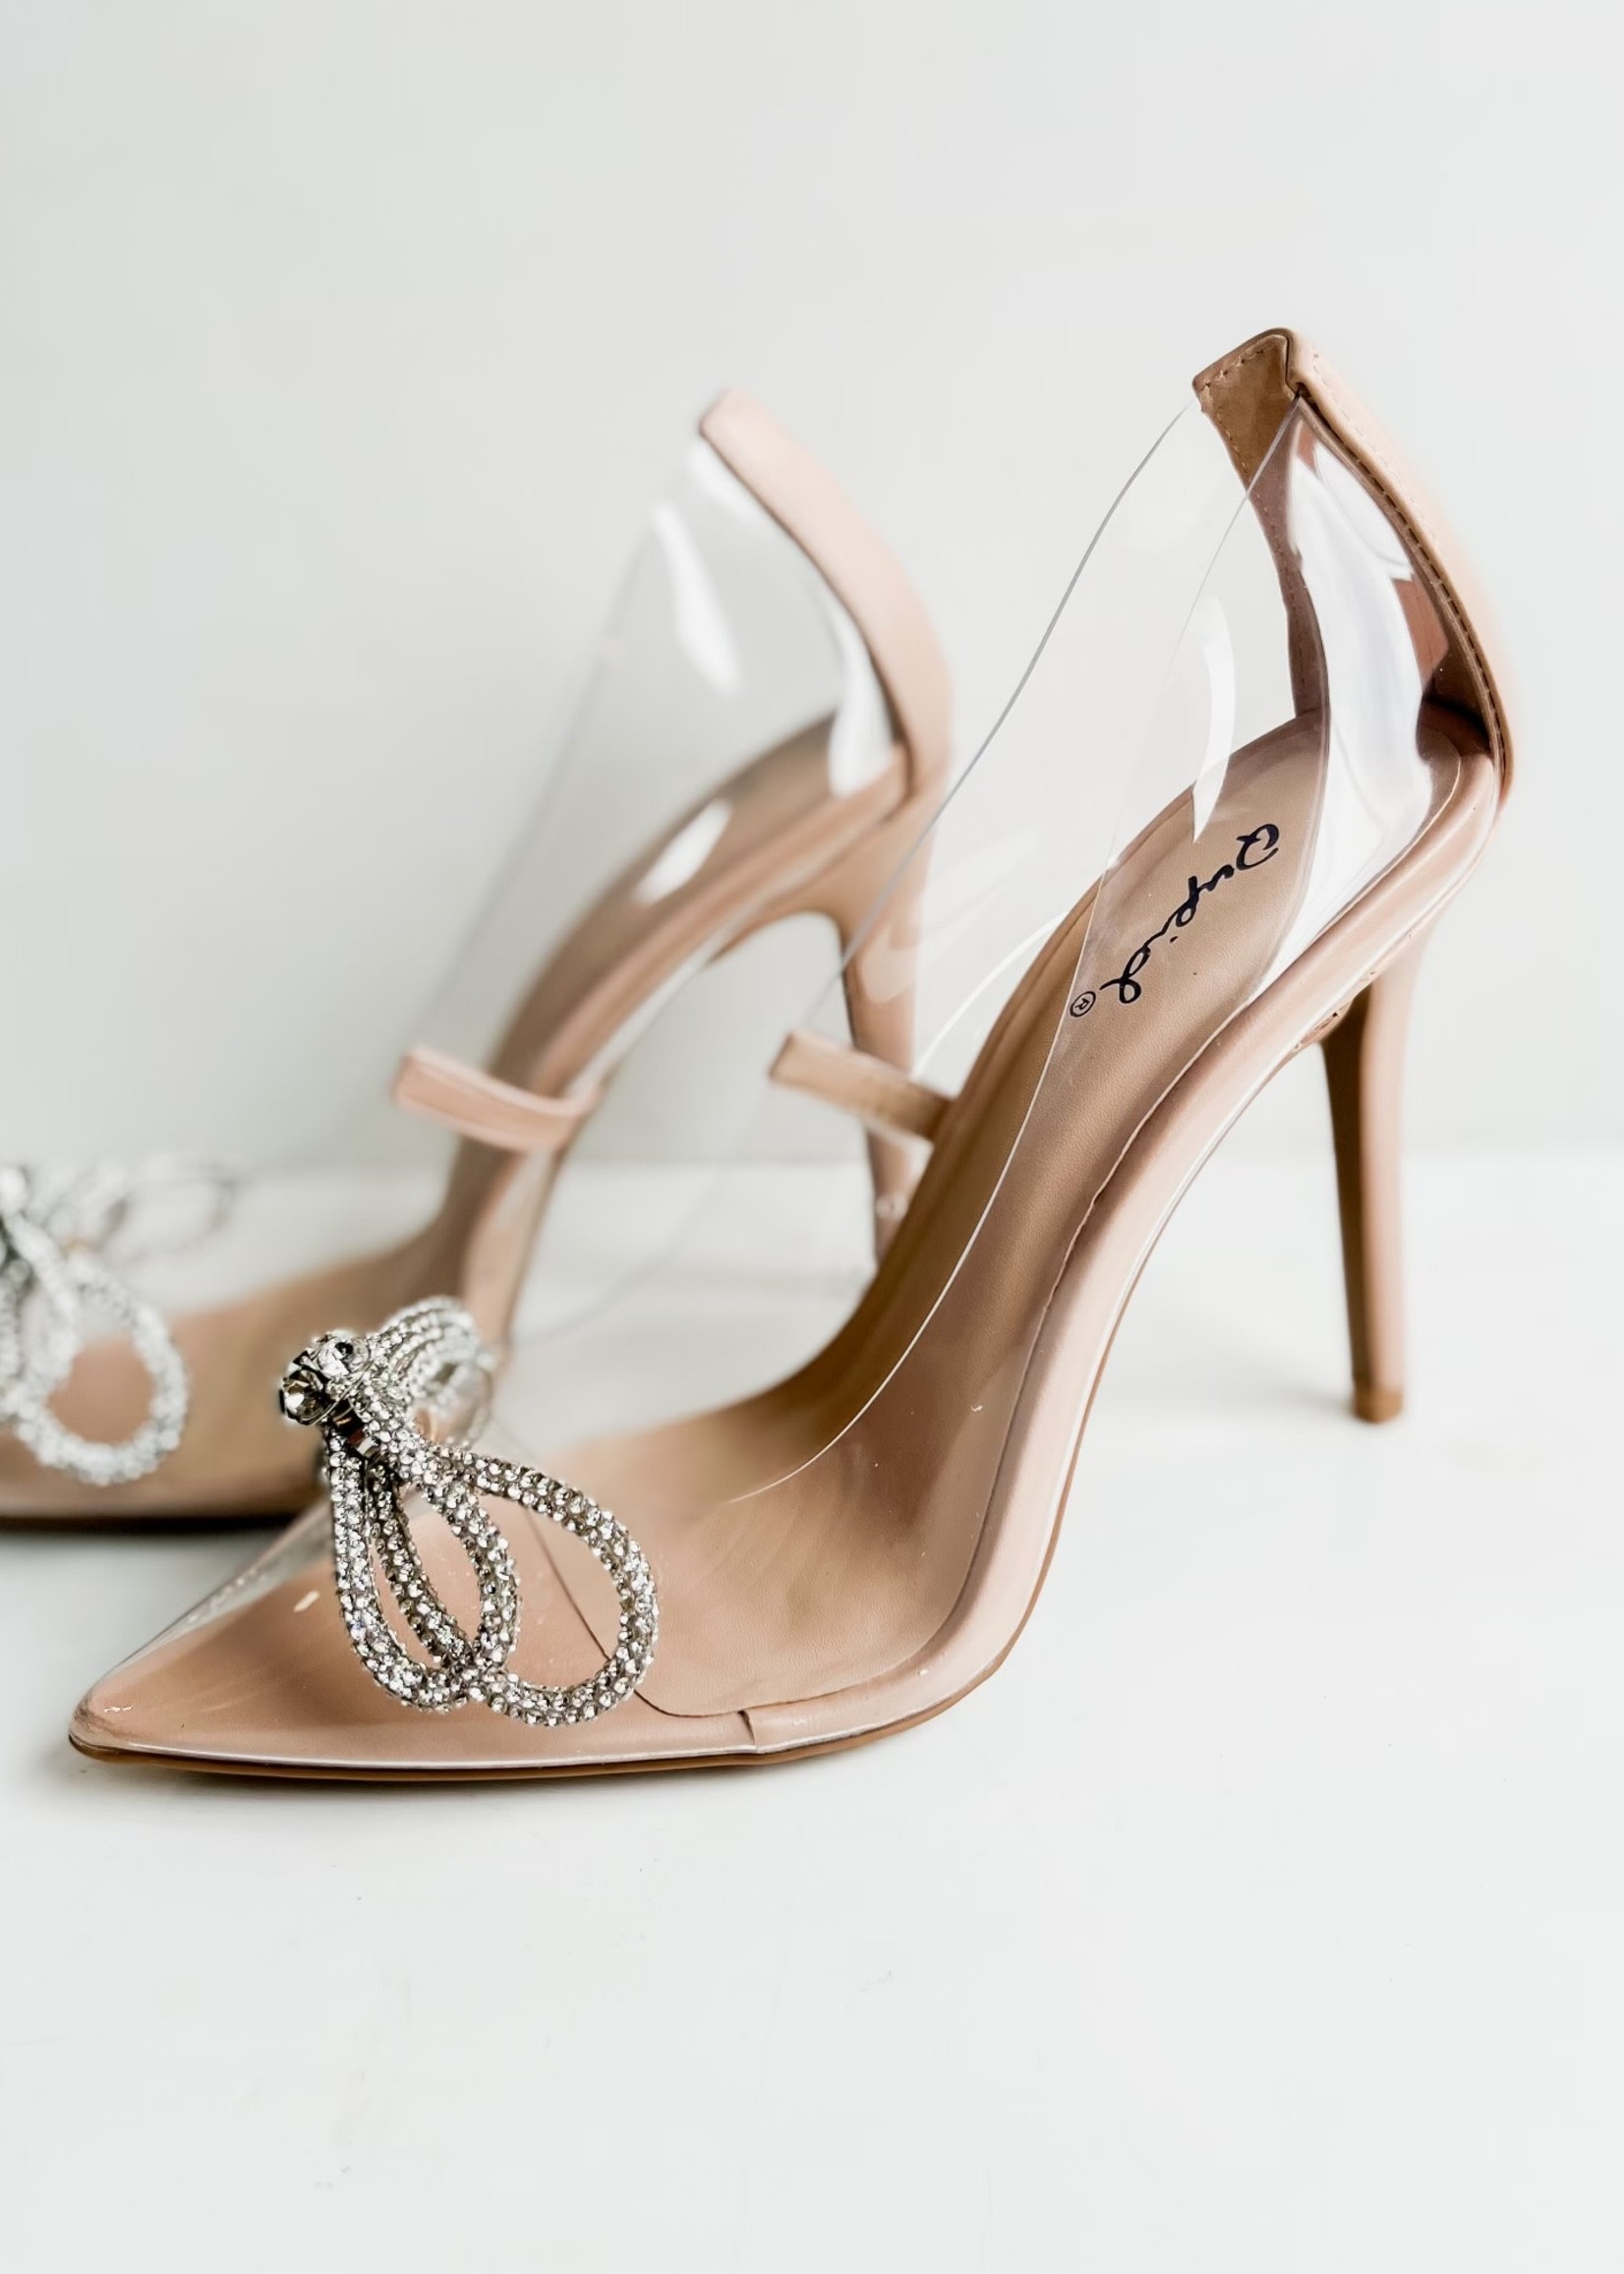 Bloom and Company Clear Nude Heel With Rhinestone Bow